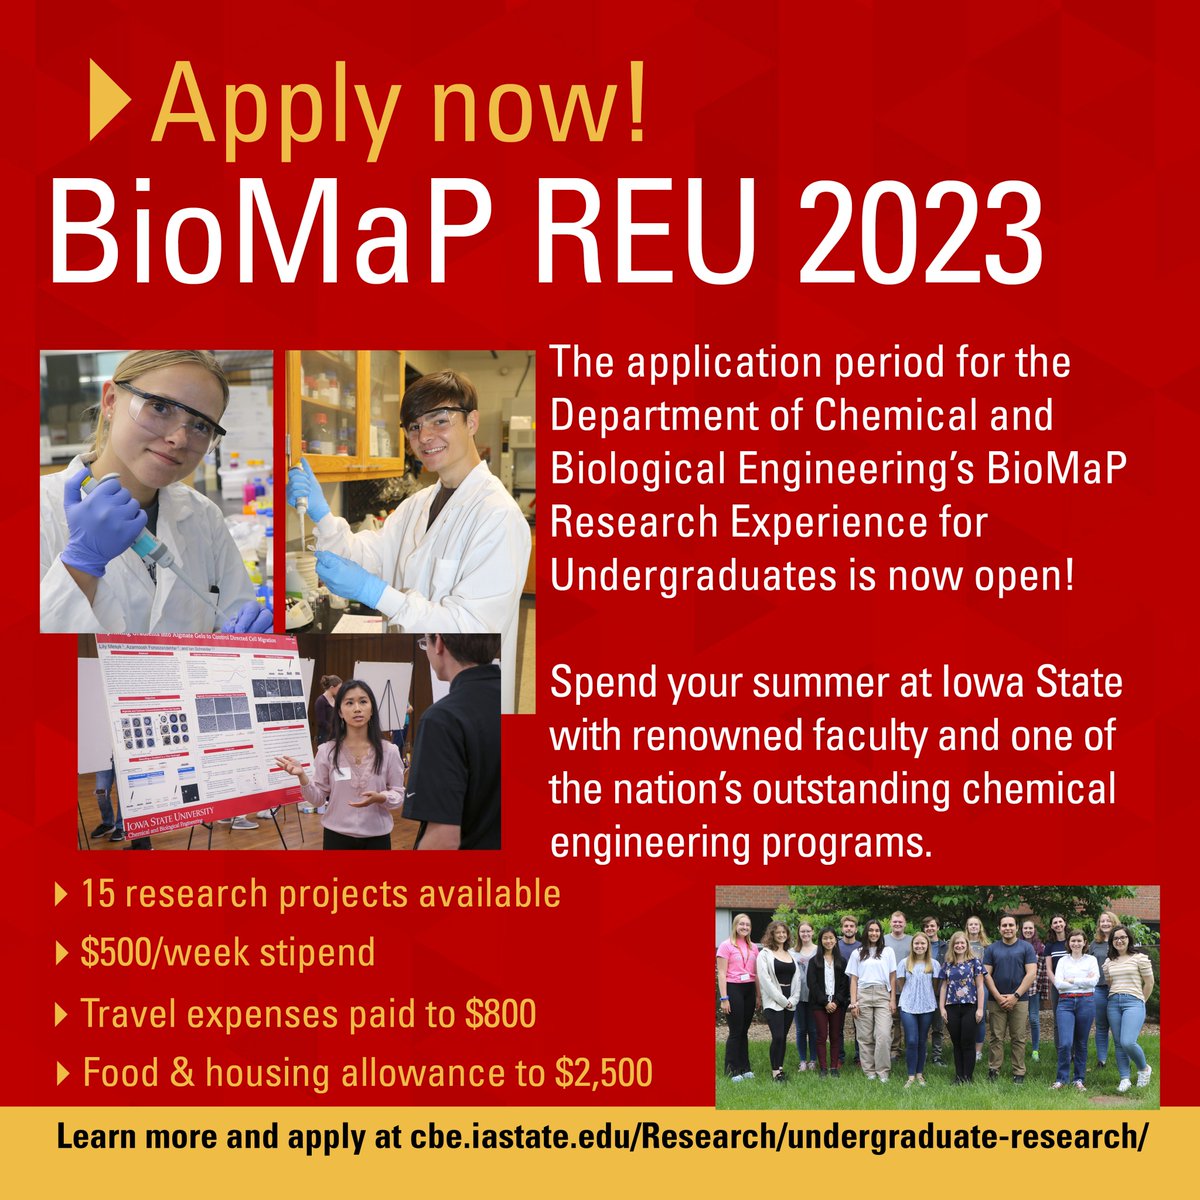 Looking for a summer undergrad research opportunity? We've got you covered! Apply now for the BioMaP REU program in chemical and biological engineering at Iowa State University, one of the nation's leading programs! Hurry! Application deadline February 15. @lamm_mh @BioMechanian